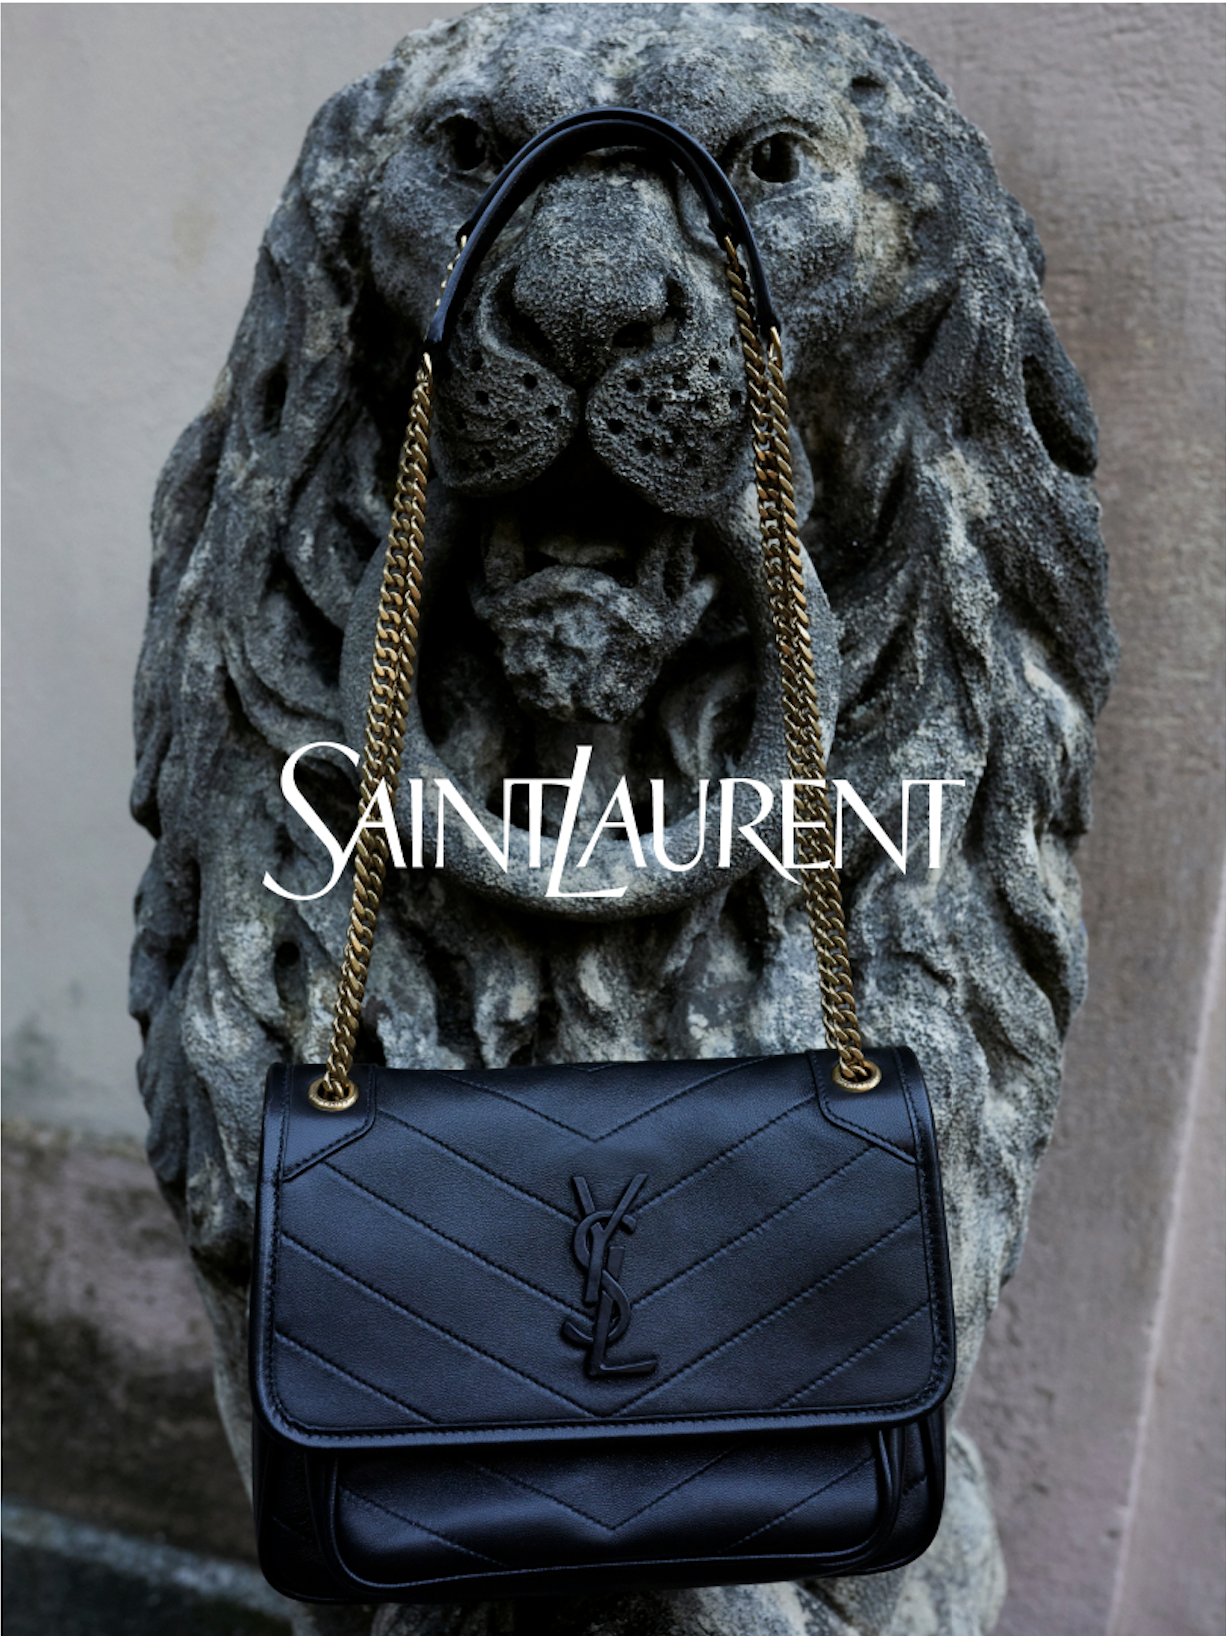 YSL-by-Anthony-Vaccarello-by-Juergen-Teller-00044.png